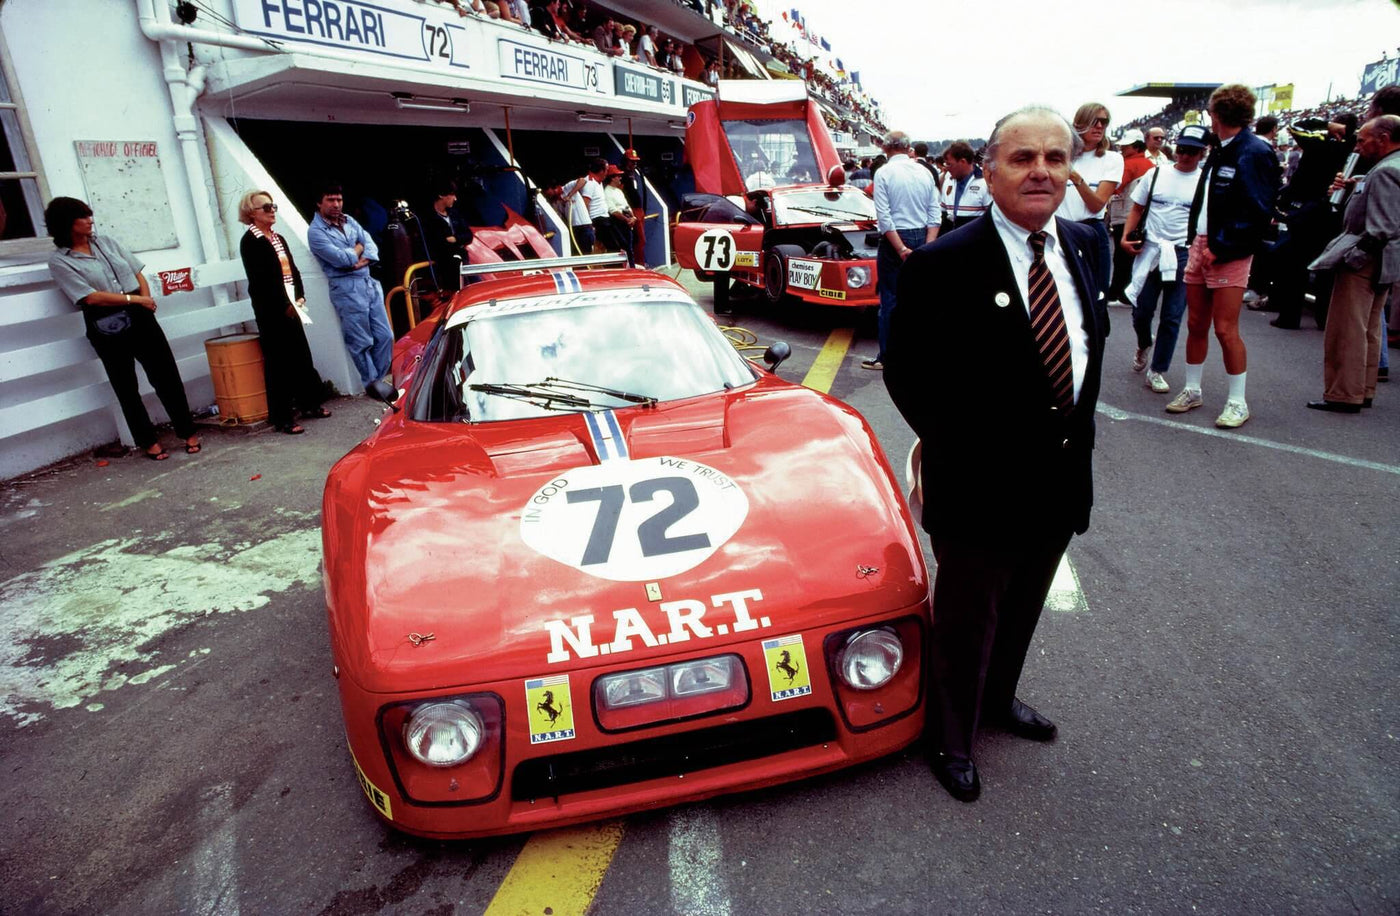 A personal engineer at Le Mans with Kart-Shop Italia: here's how